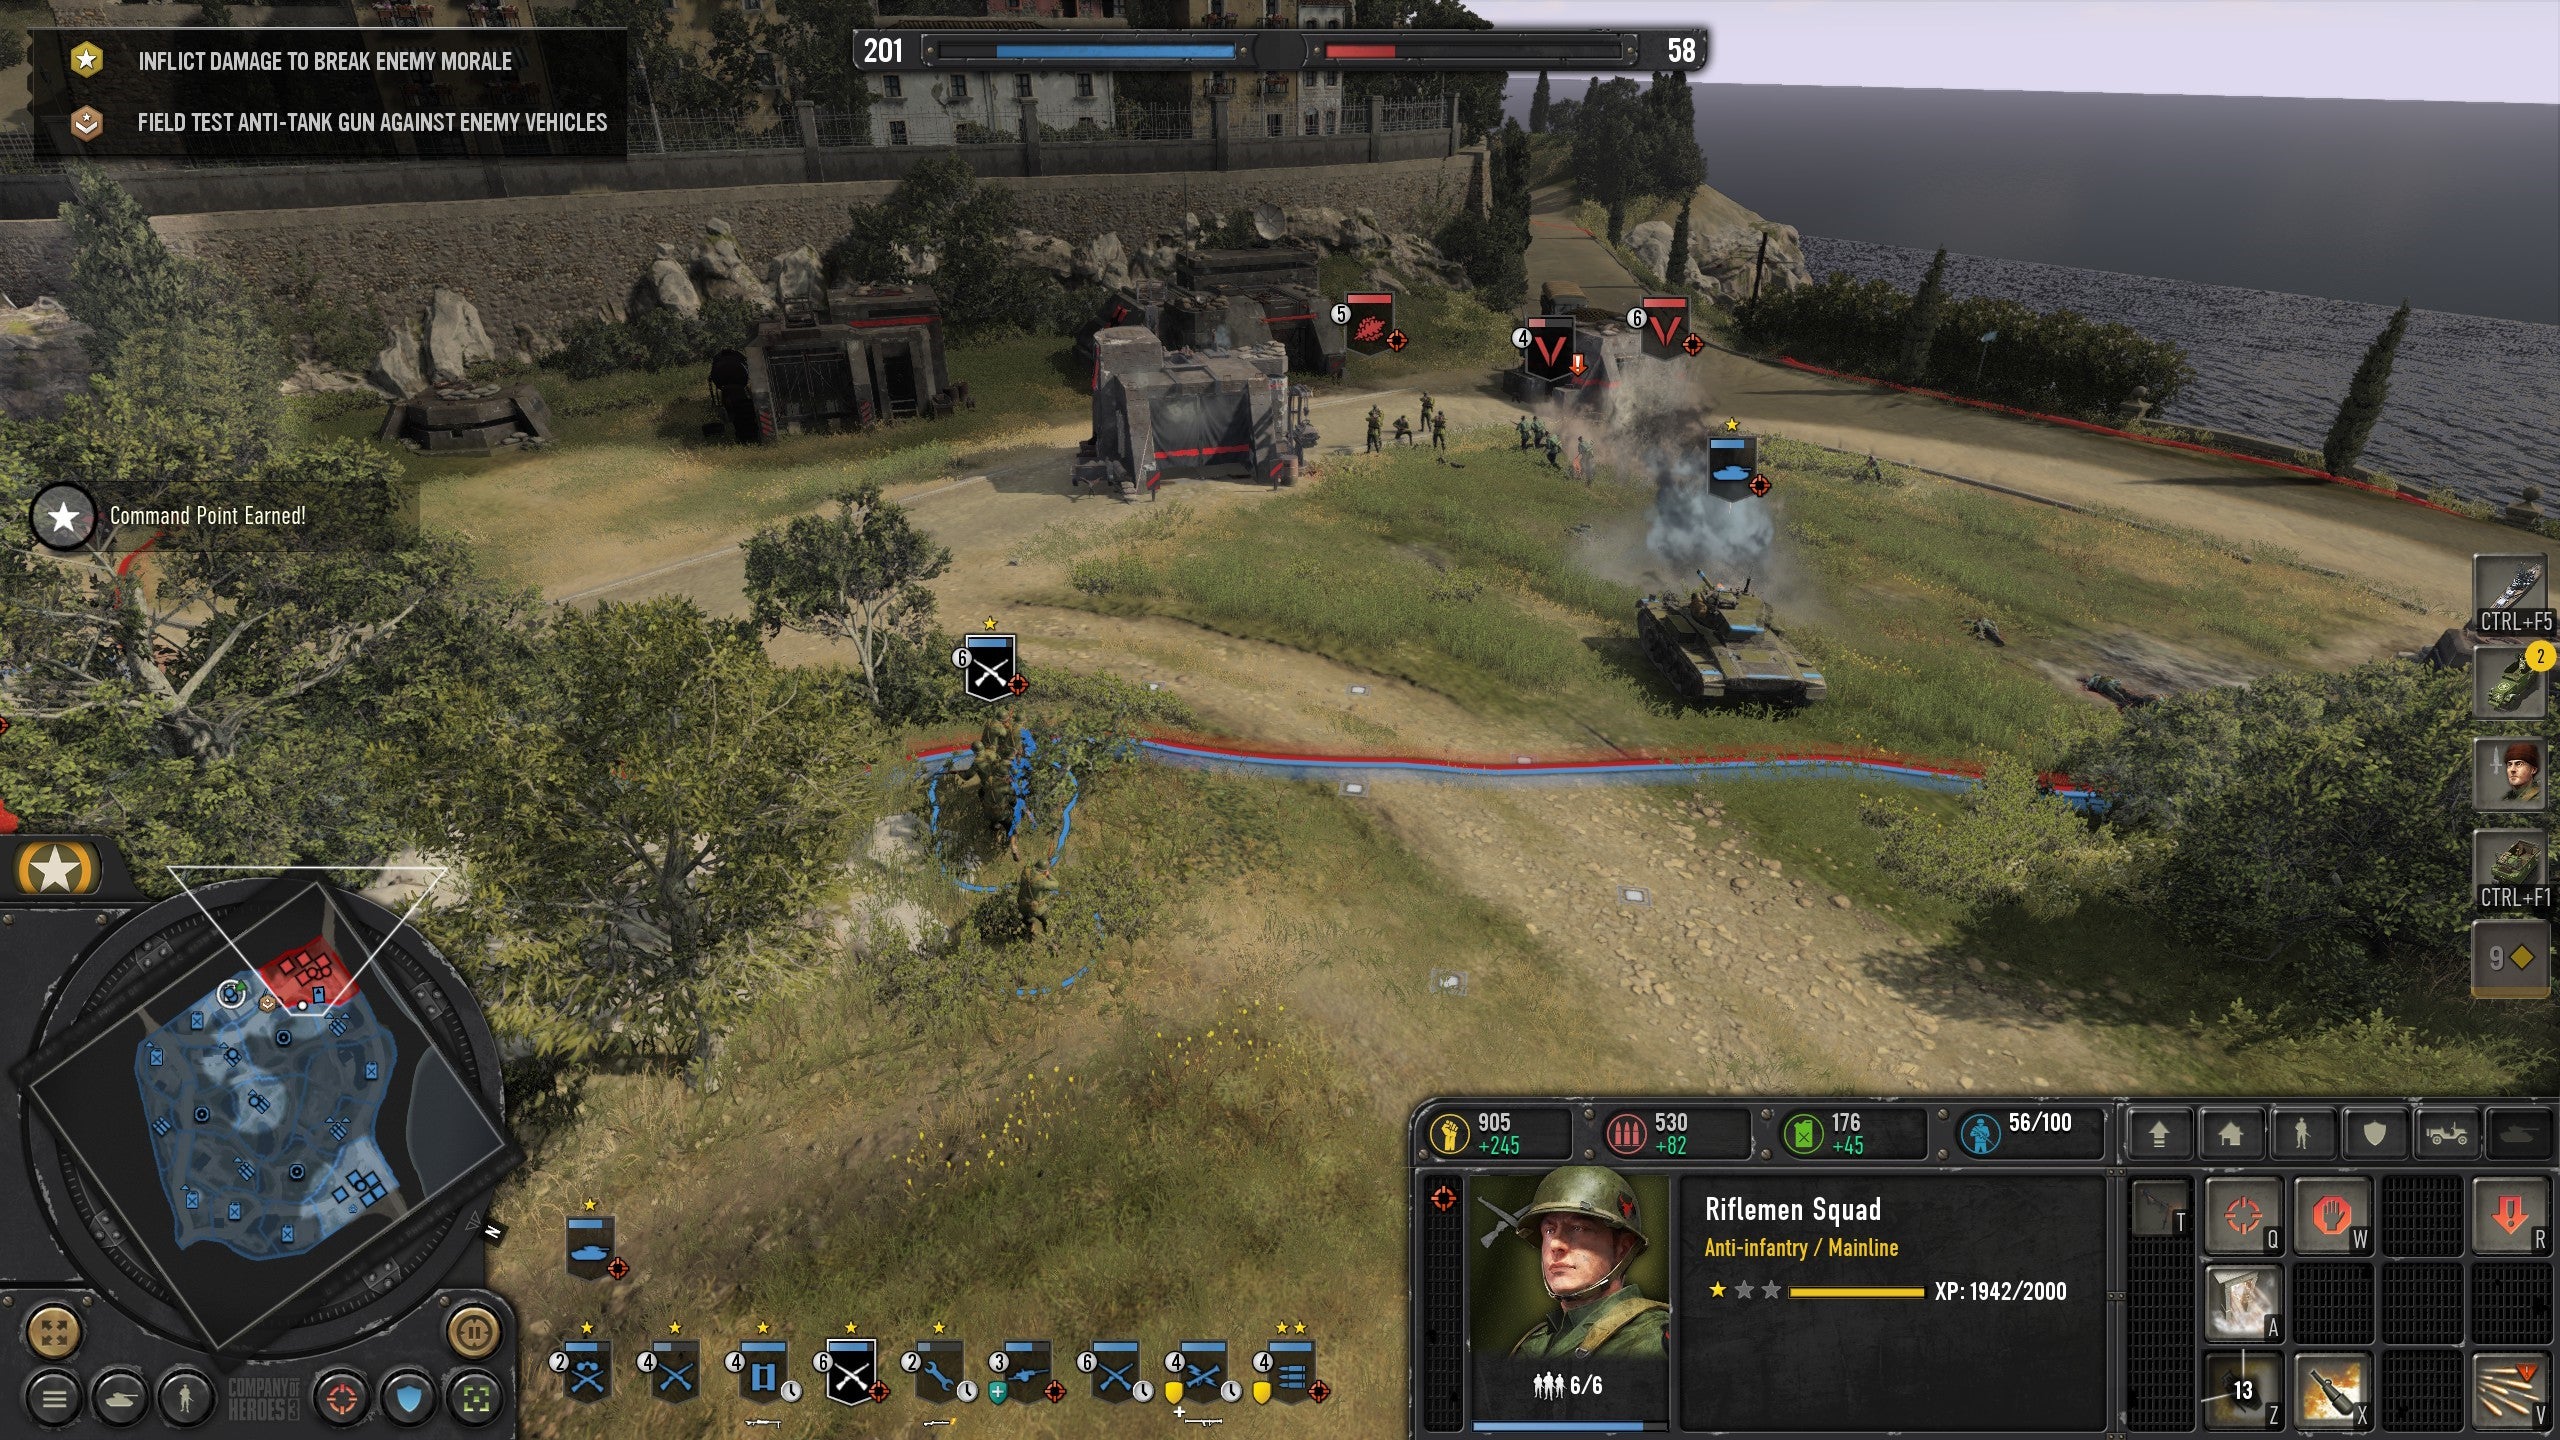 Tanks and soldiers roll into to destroy an enemy base in Company Of Heroes 3